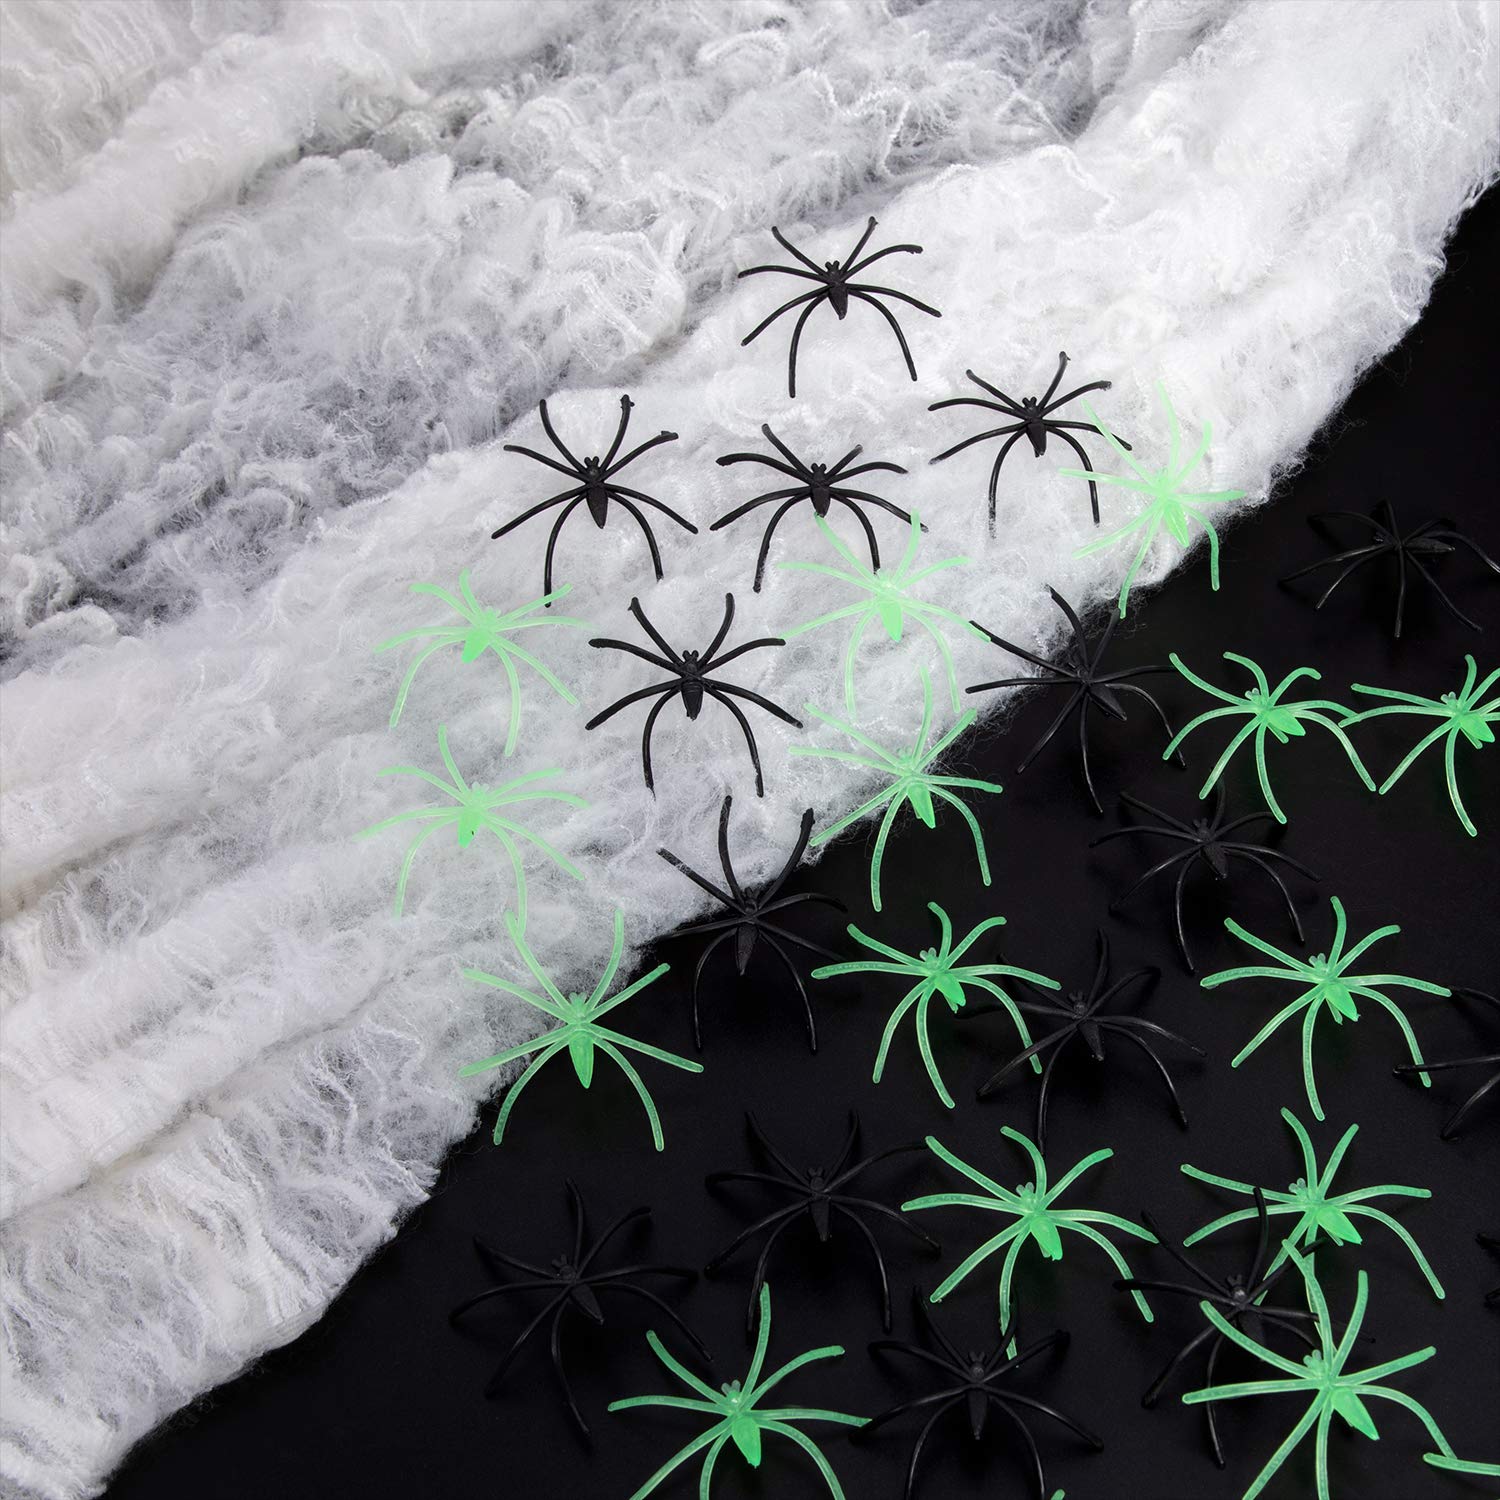 Halloween Decorations Spider Webs - 1200sqft Spider Web Decor +100 Black Spiders + 50 Fluorescent spiders, Indoor Outdoor Spooky Spider Webbing with Fake Spiders for Halloween Party Decorations